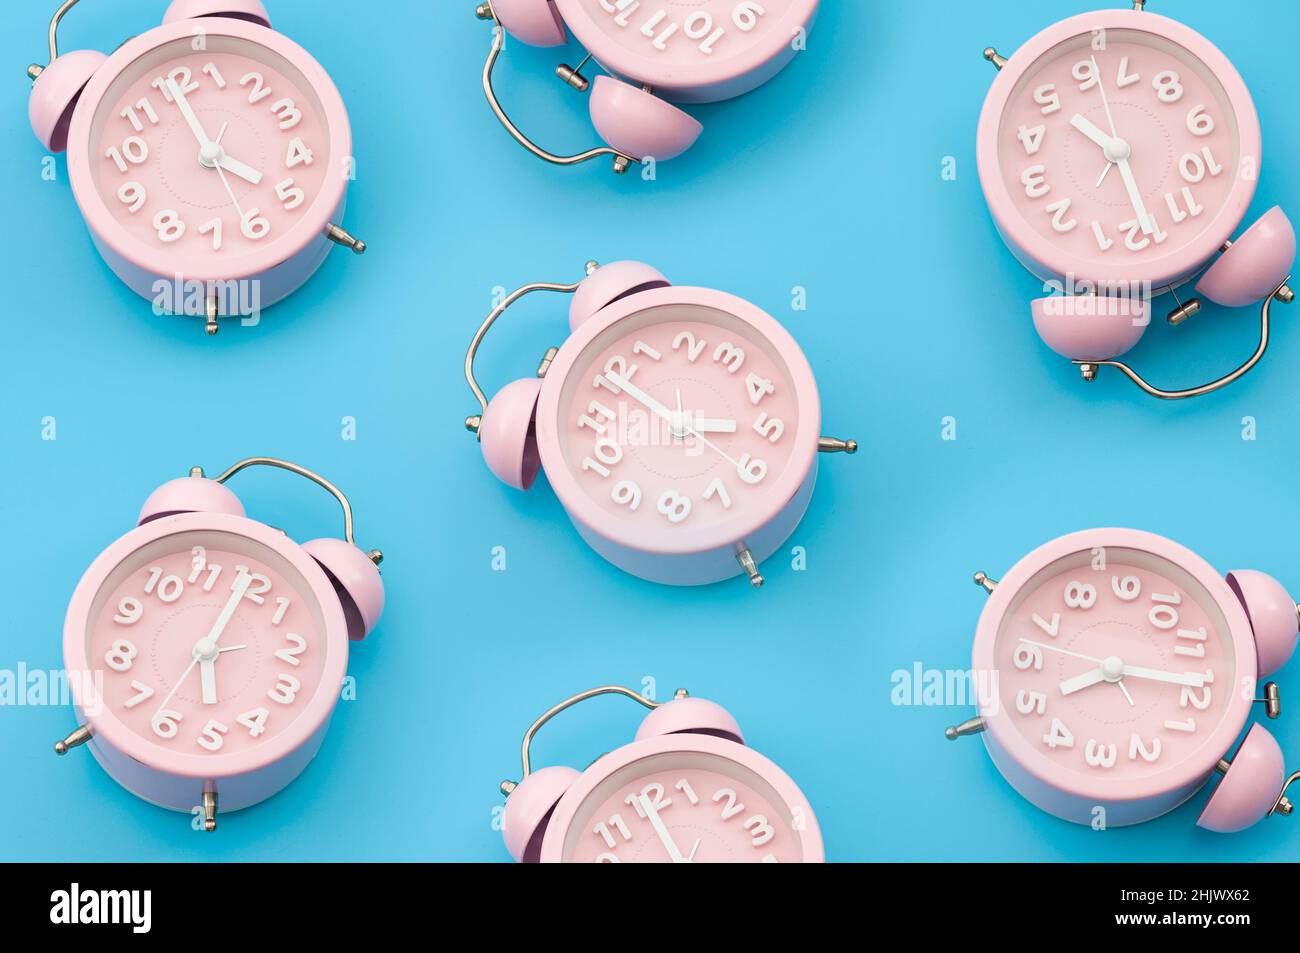 Nostalgia repetitive wallpaper and passing of time concert with minimalist seamless pattern layout of pastel pink mechanical alarm clock isolated on v Stock Photo